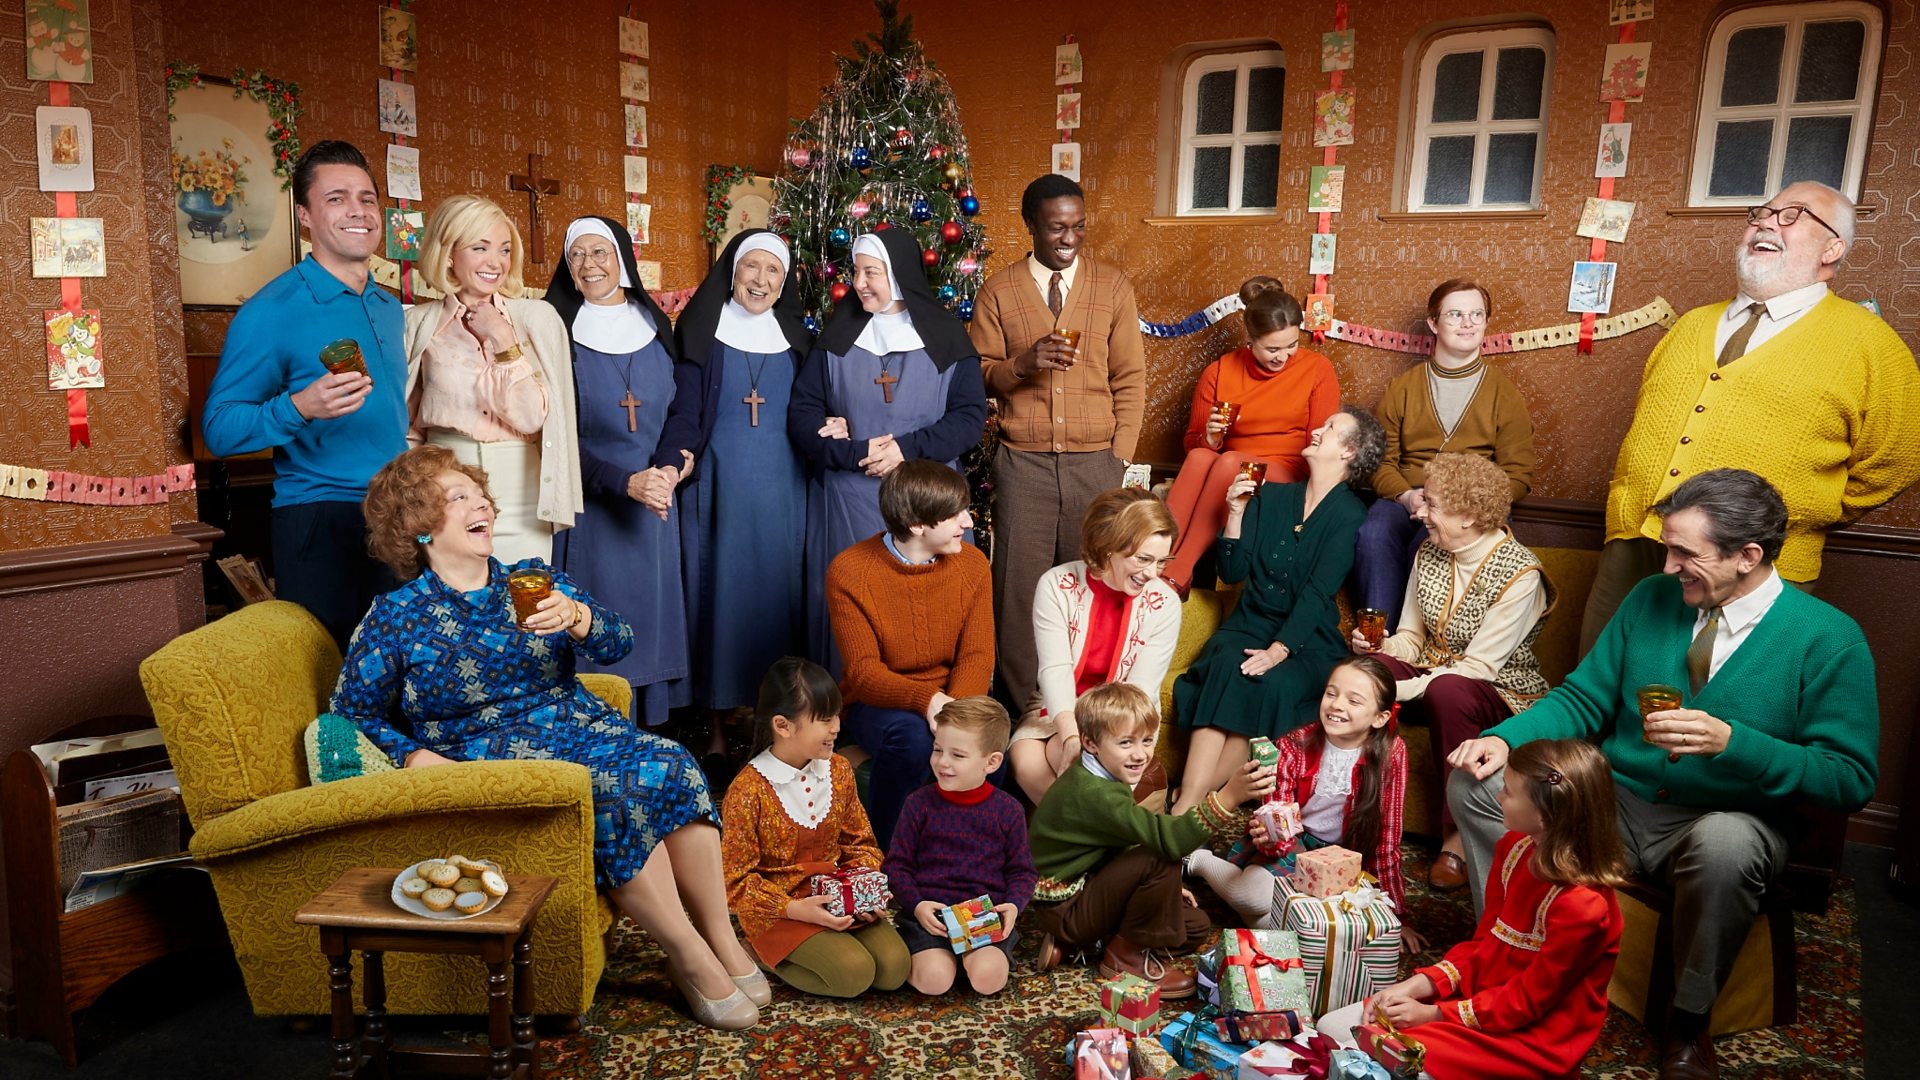 Call The Midwife Christmas Special cast tease "totally unexpected